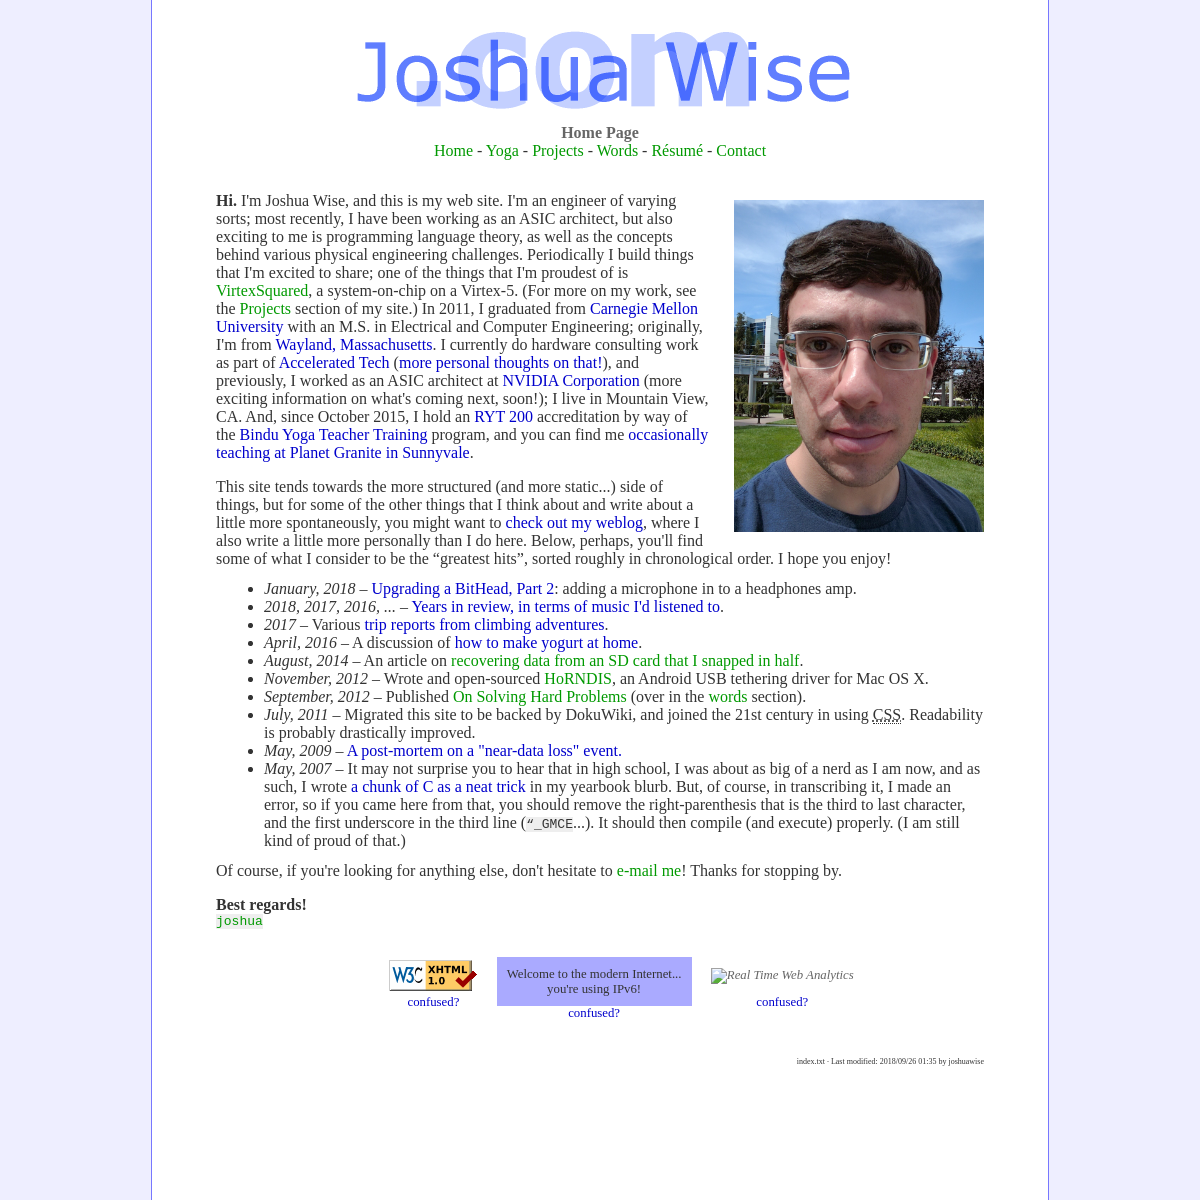 A complete backup of joshuawise.com